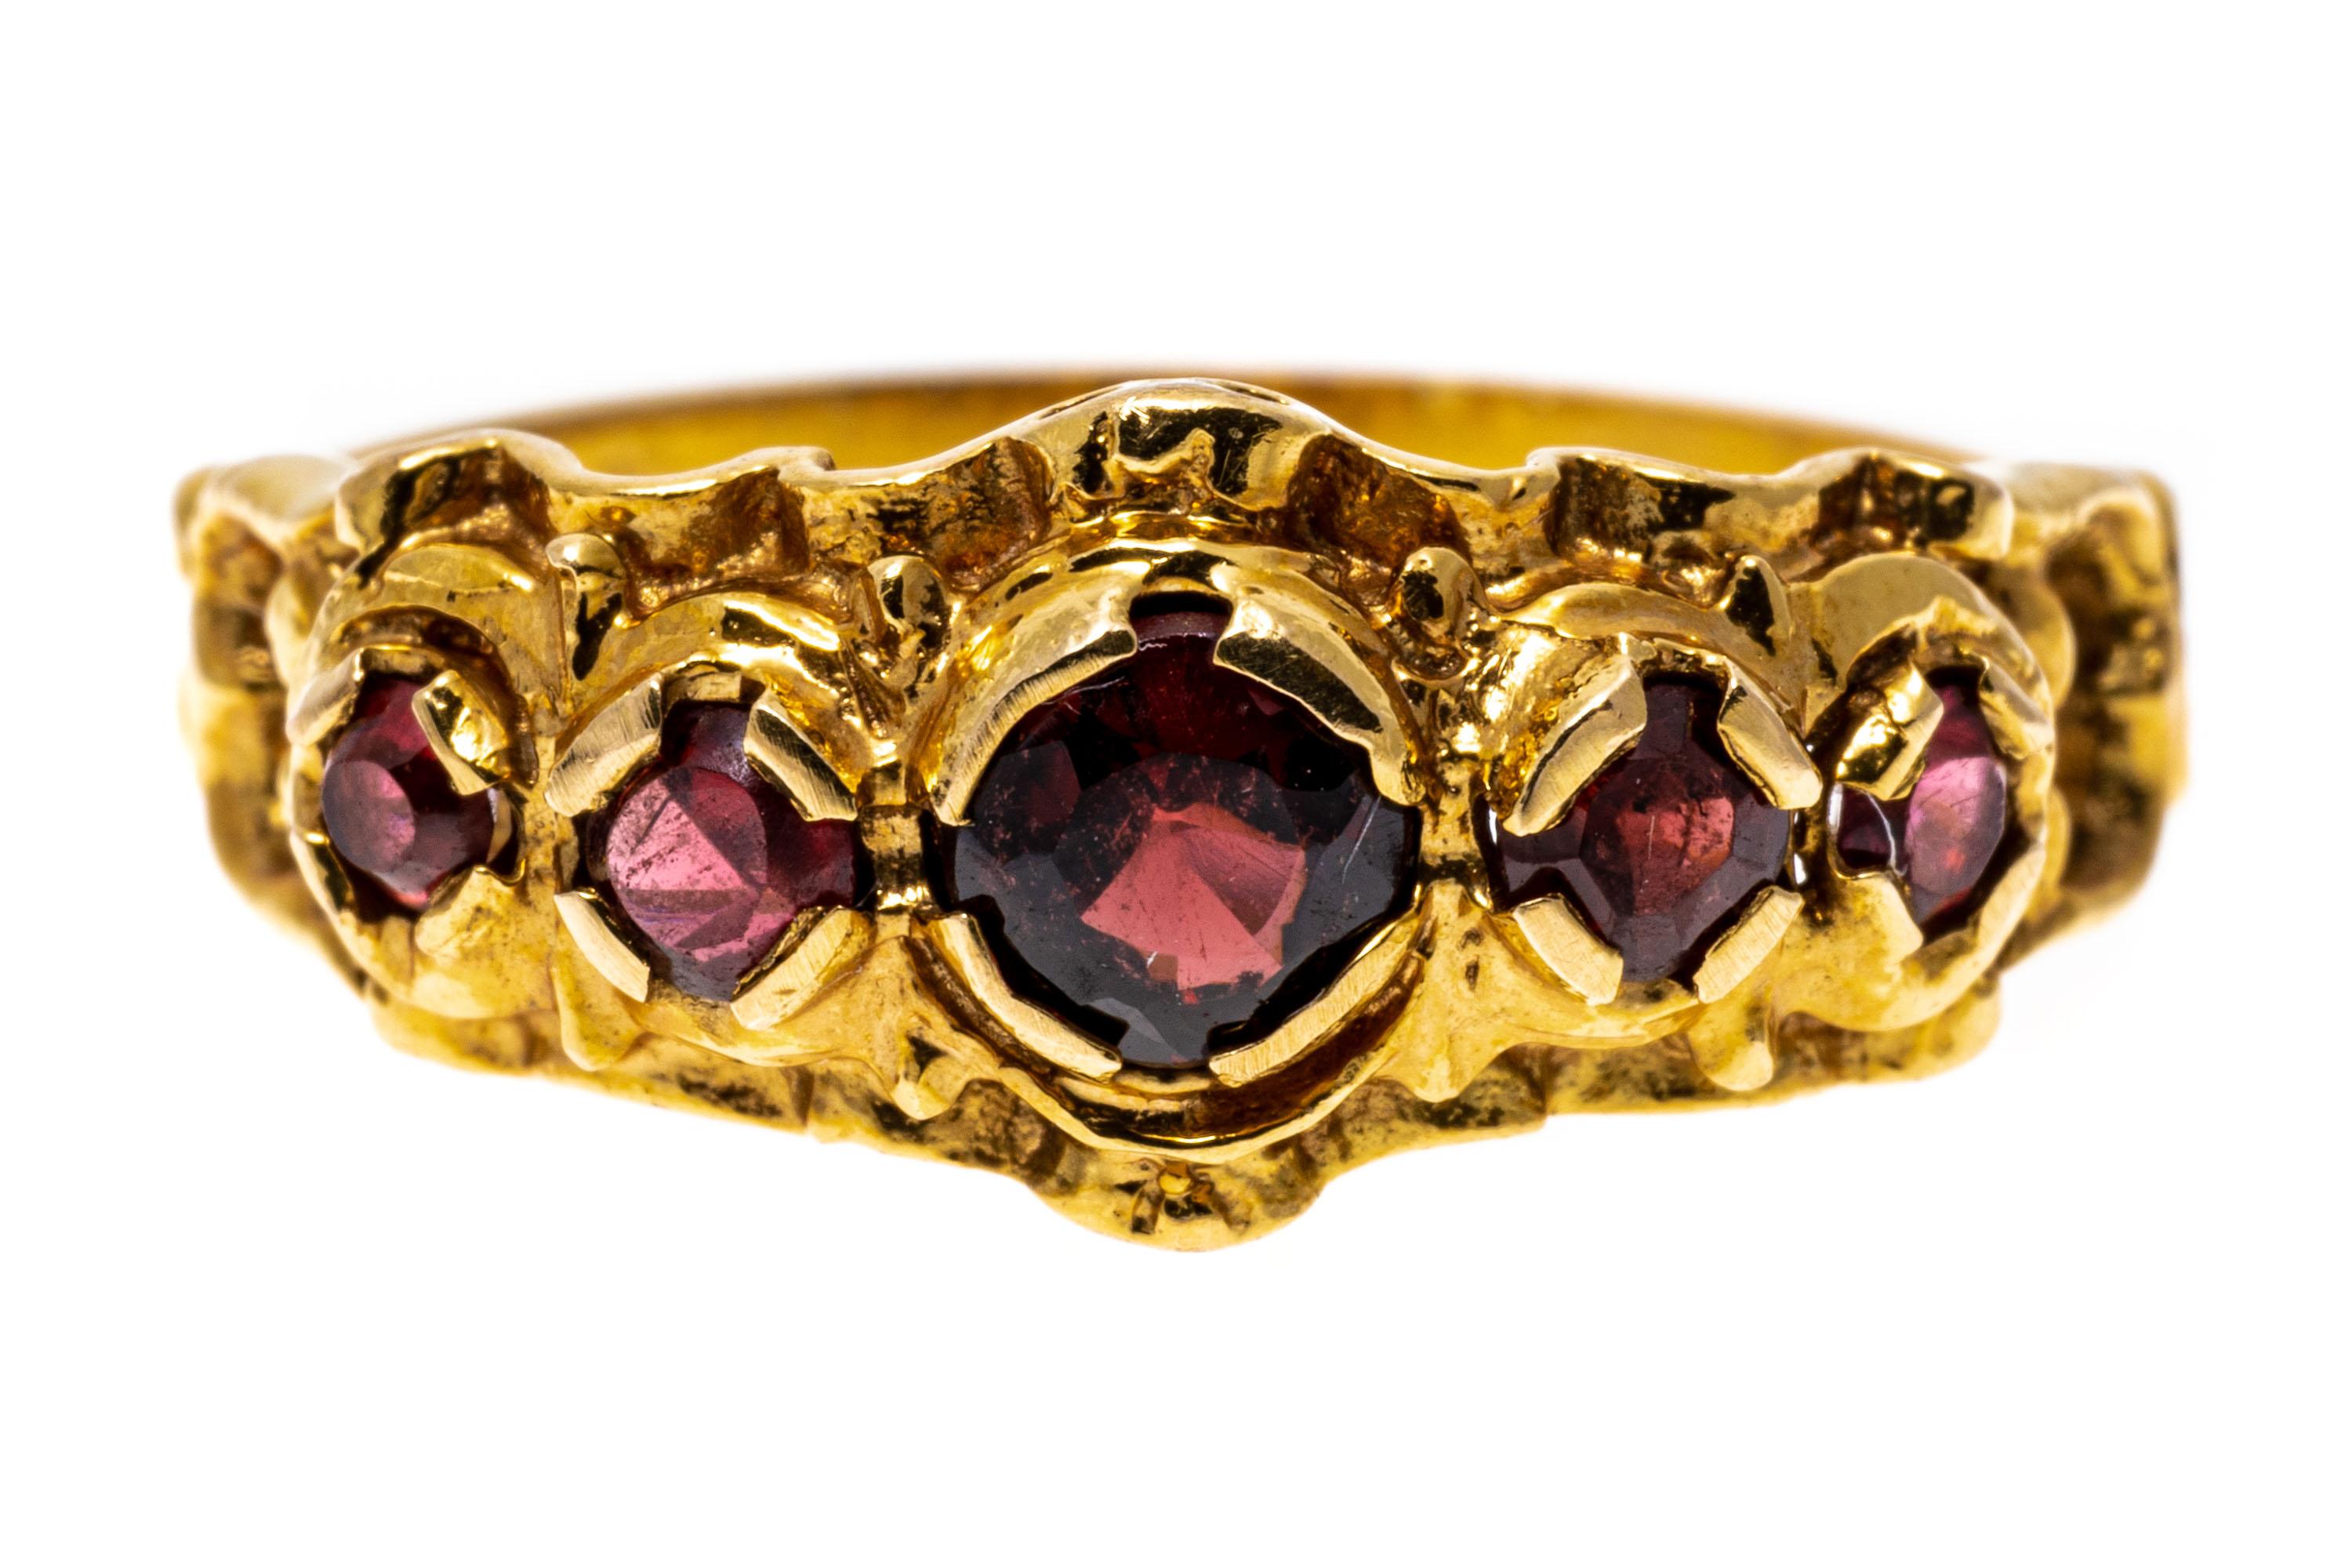 14k yellow gold ring. This ornate ring is a band style set with graduated, round-faceted, medium to dark color garnets, approximately 0.38 TCW, decorated with an ornamented pierced frame.
Marks: 14k
Dimensions: 9/16